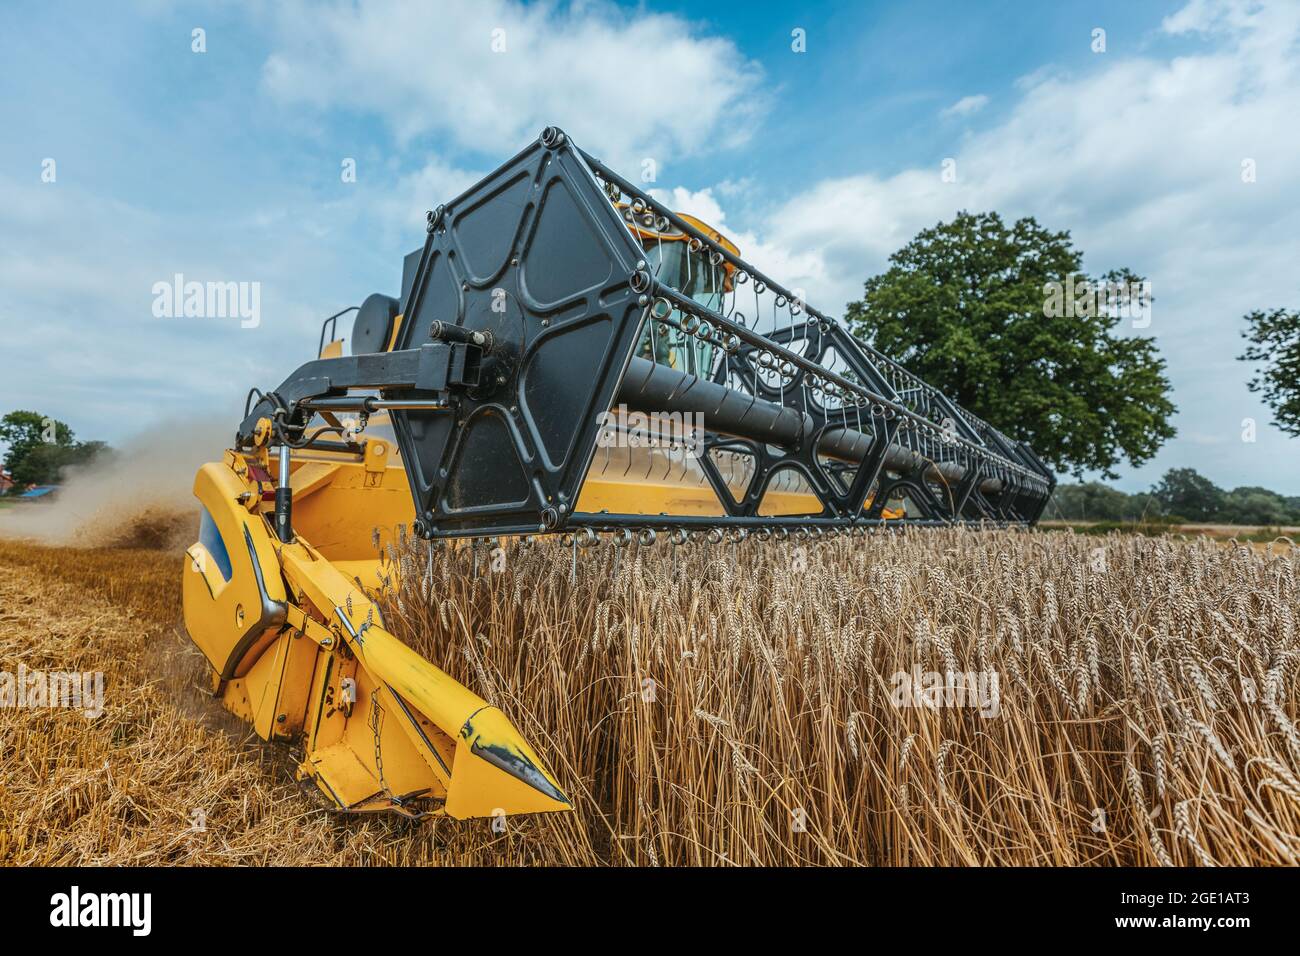 https://c8.alamy.com/comp/2GE1AT3/a-yellow-combine-harvests-wheat-on-a-field-in-germany-2GE1AT3.jpg